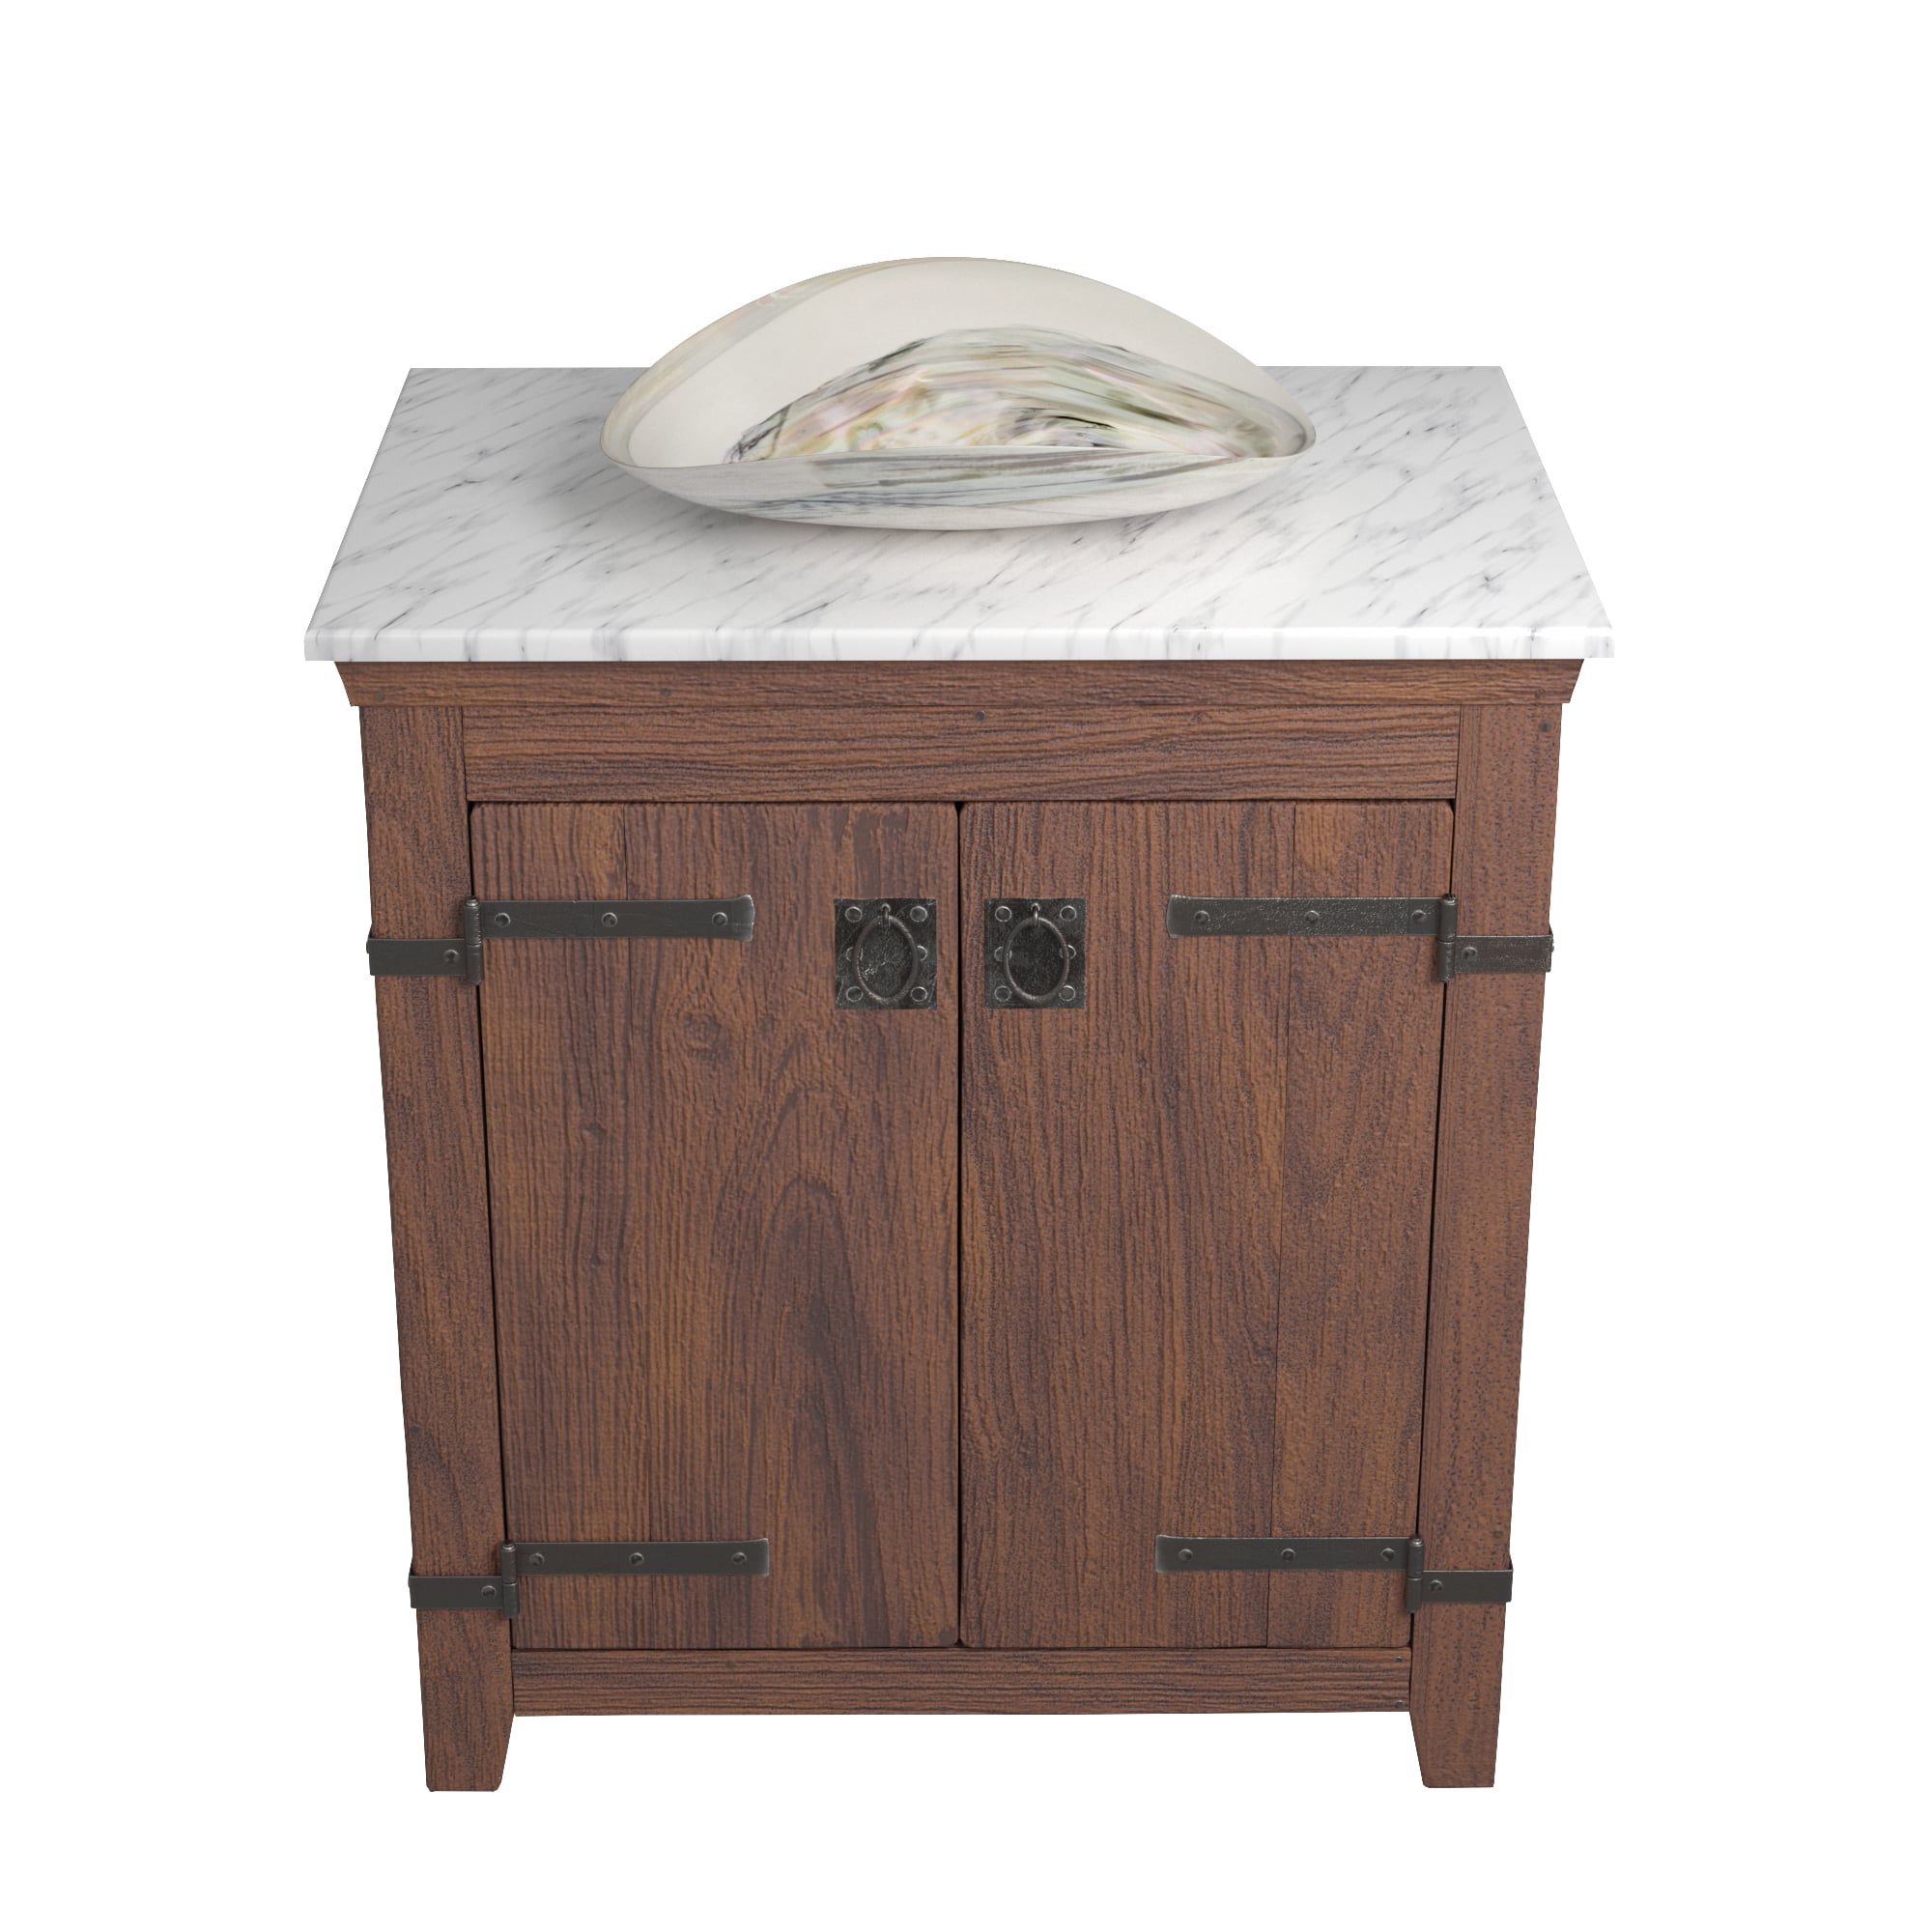 Native Trails 30" Americana Vanity in Chestnut with Carrara Marble Top and Sorrento in Abalone, Single Faucet Hole, BND30-VB-CT-MG-091